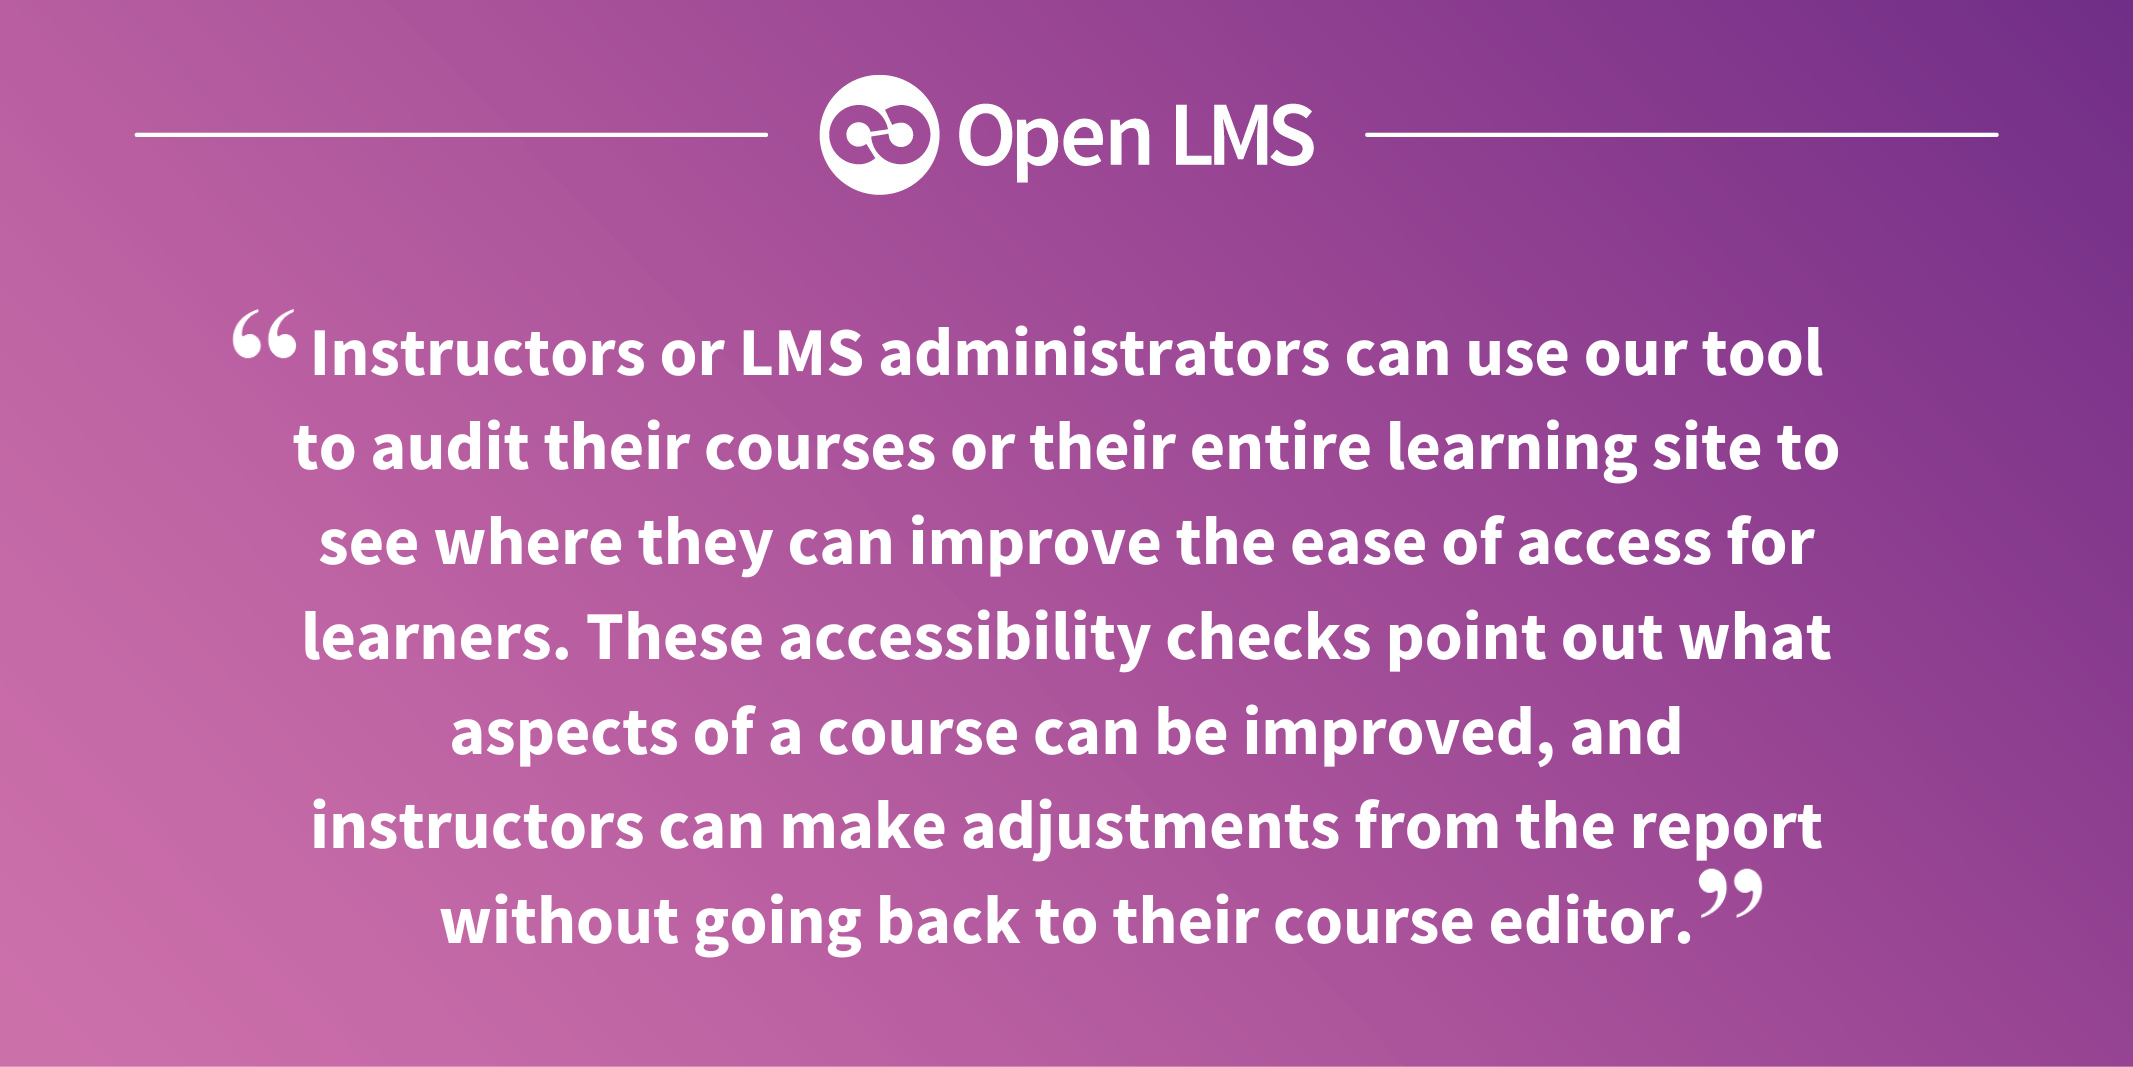 Instructors or LMS administrators can use our tool to audit their courses or their entire learning site to see where they can improve the ease of access for learners. These accessibility checks point out what aspects of a course can be improved, and instructors can make adjustments from the report without going back to their course editor.